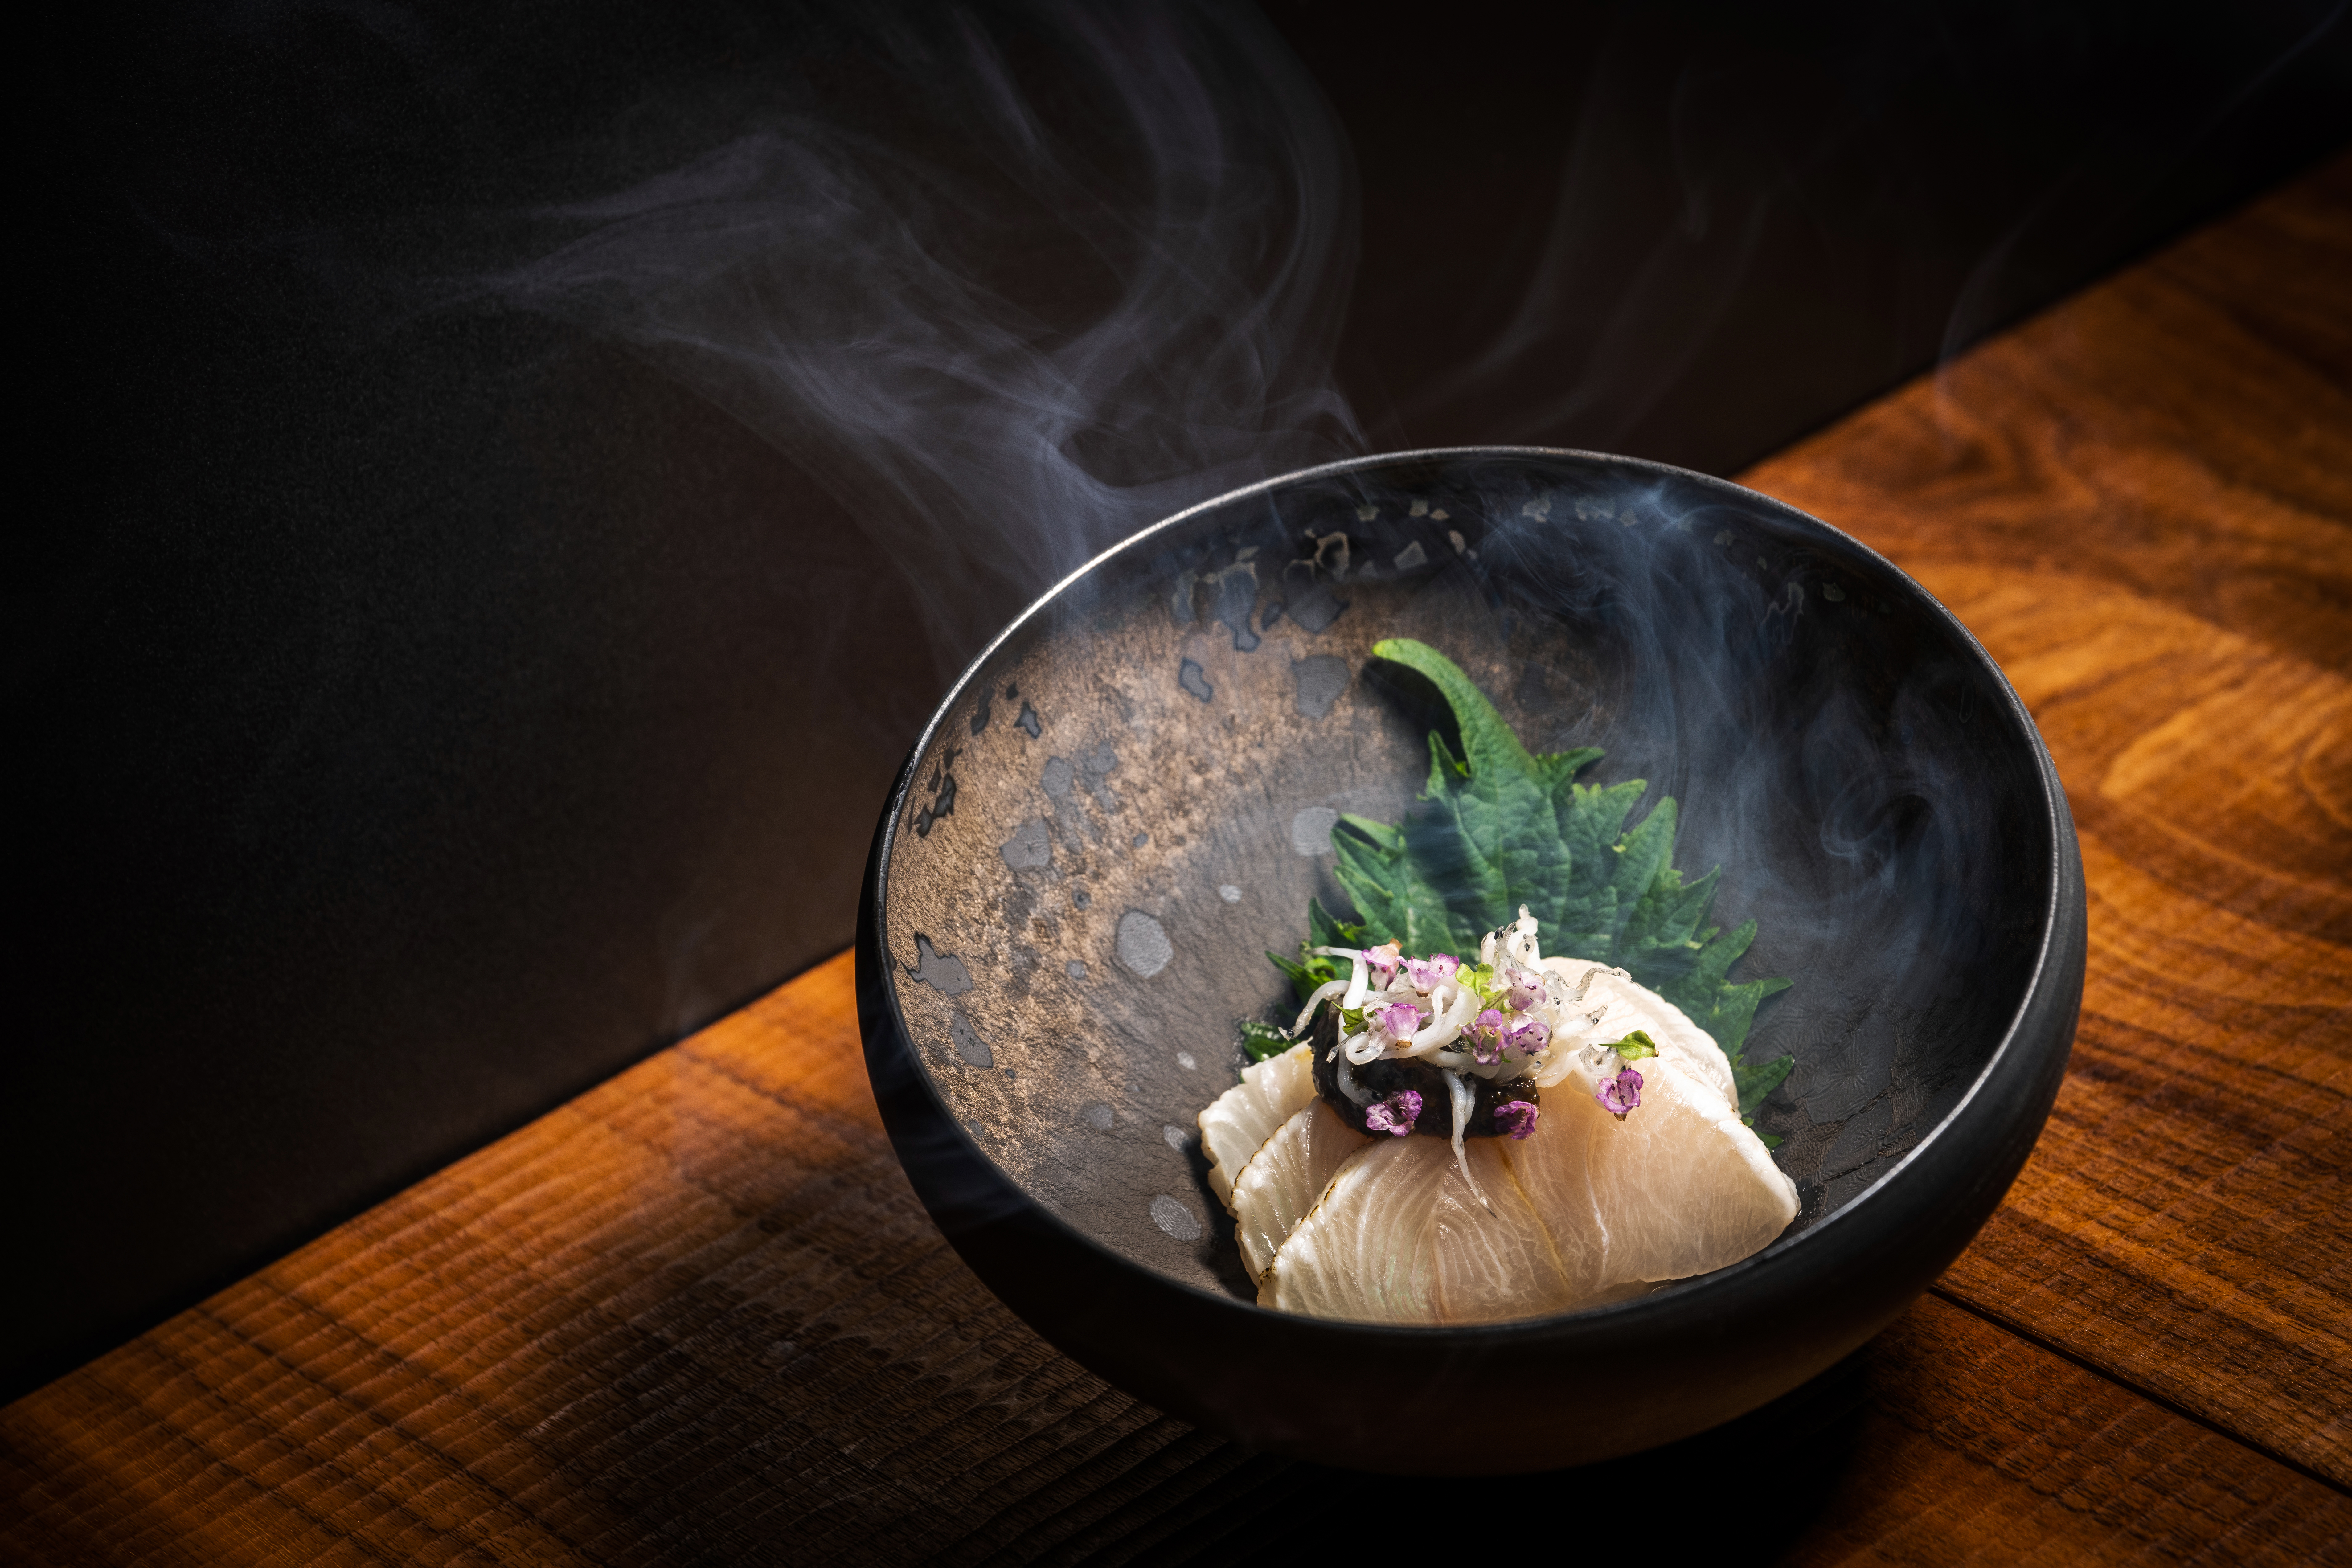 Mikuriya; a new Japanese experience that elevates the gourmet culinary journey at the Dolder Grand in Zurich